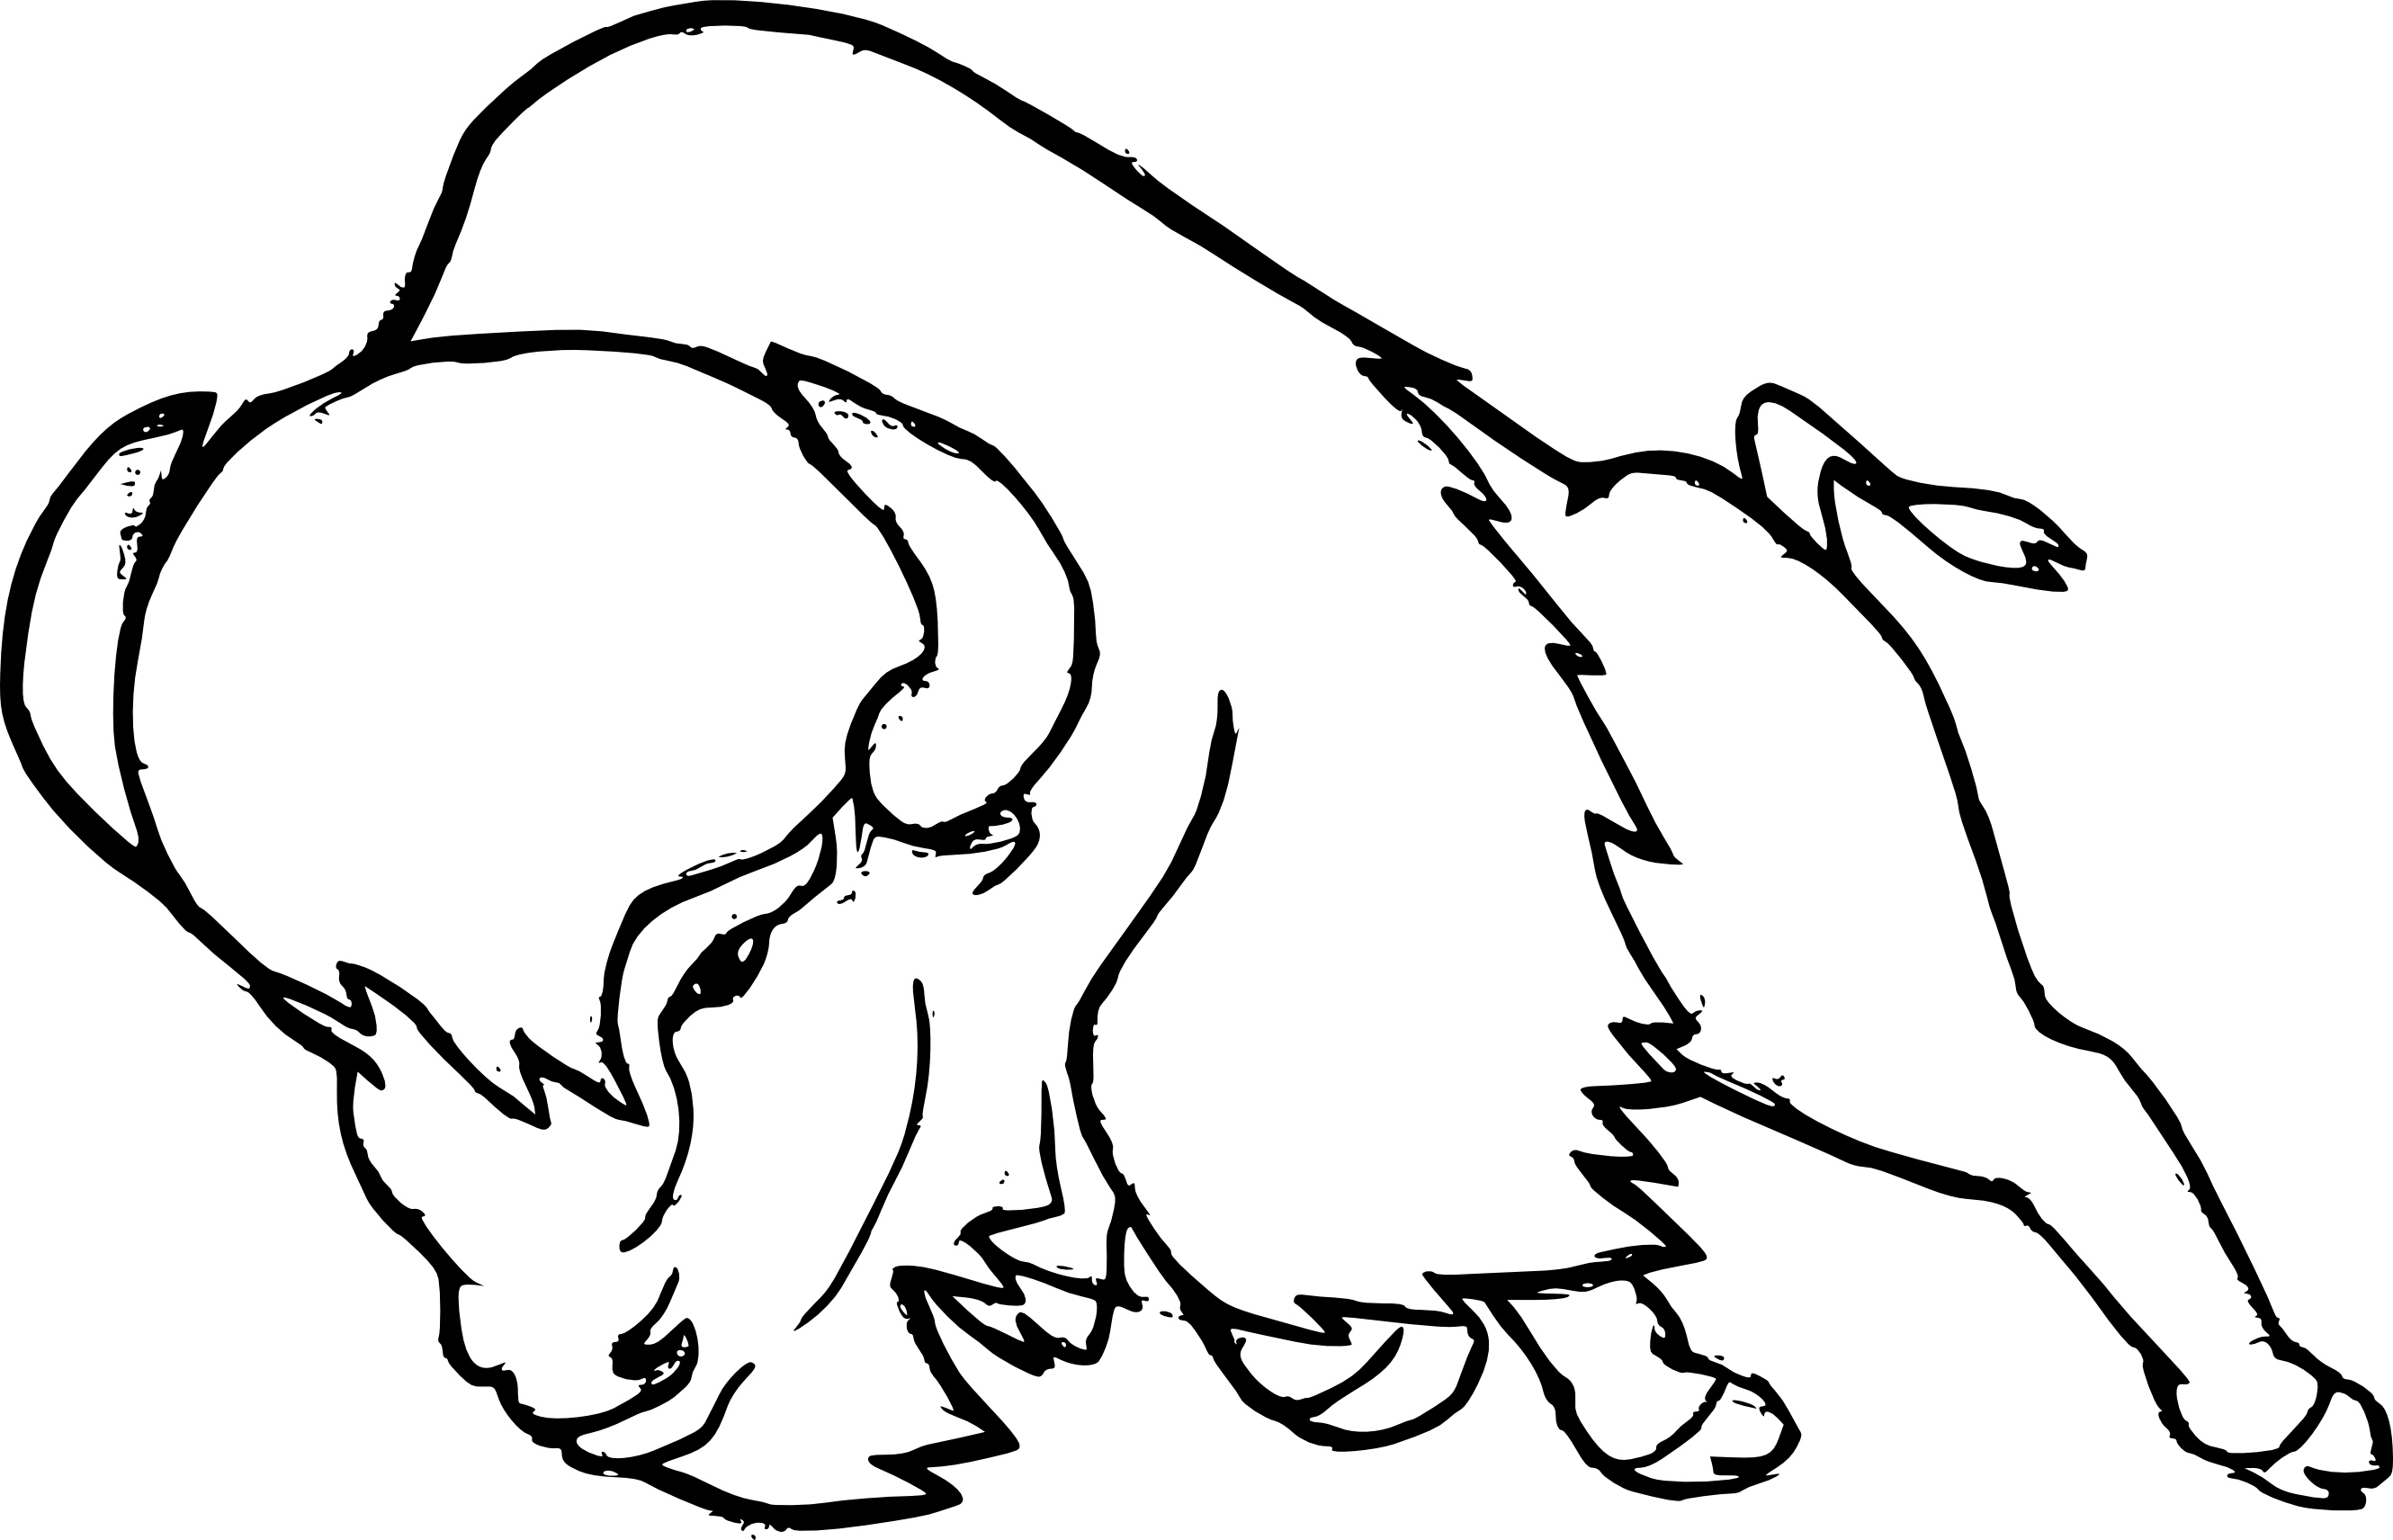 Bison drawing and coloring page